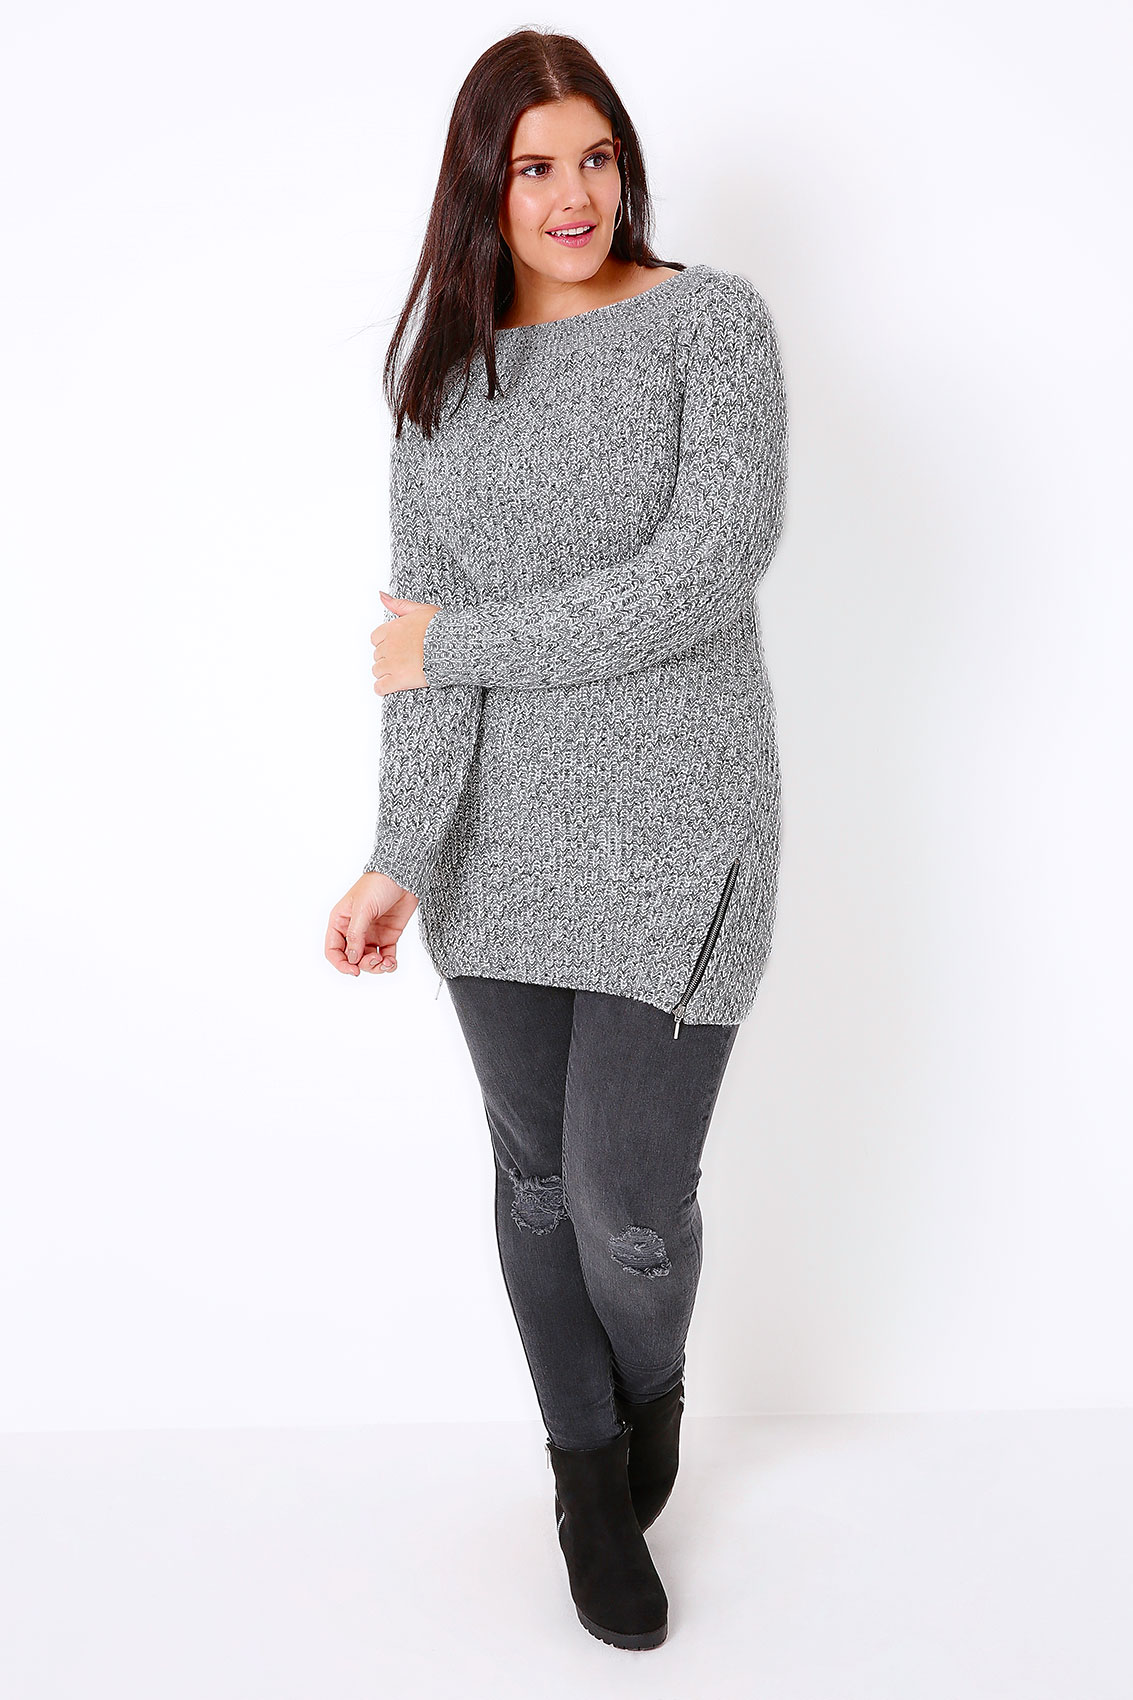 Black & Ivory Knitted jumper With Zip Hem Detail, Plus Size 16 to 32